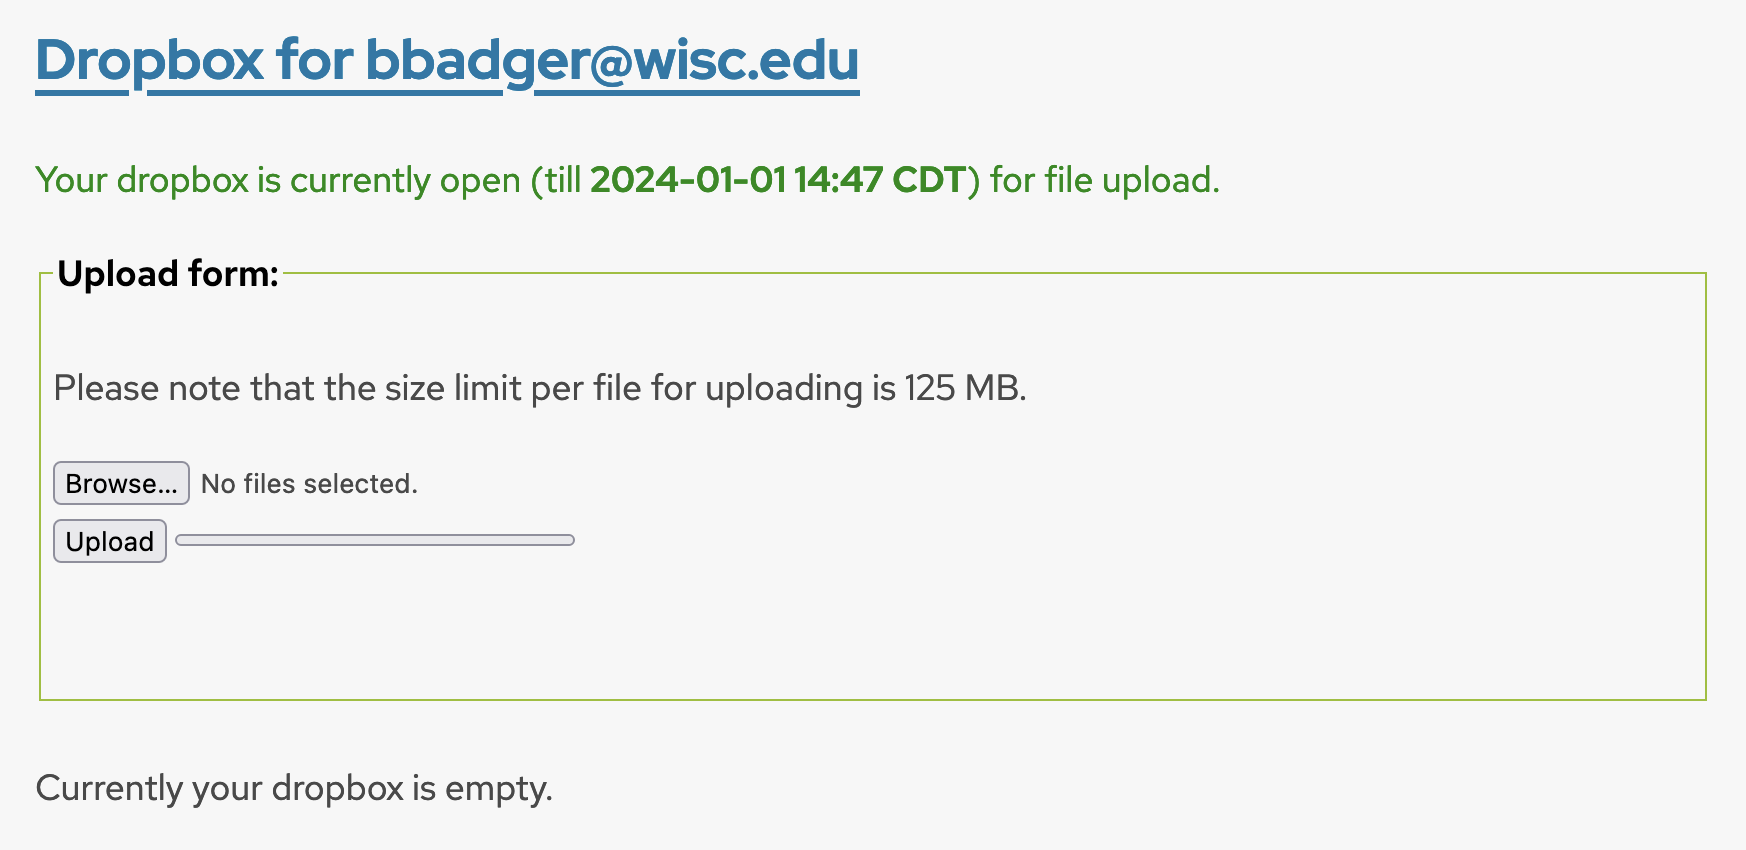 Screenshot showing the dropbox for bbadger@wisc.edu on the live site. The upload form is visible and the dropbox is currently empty.